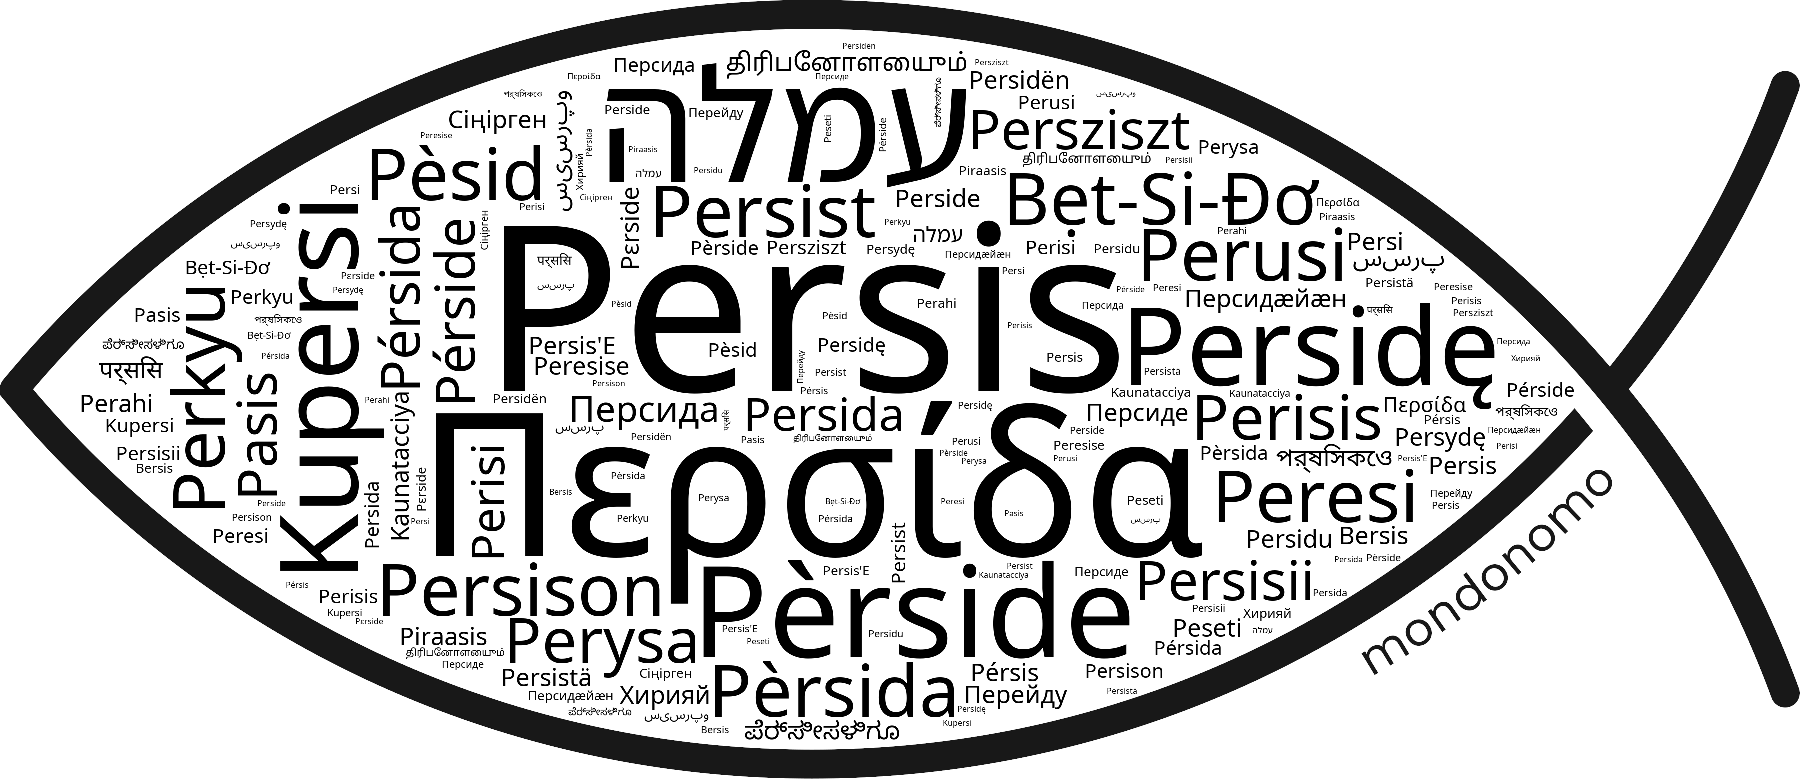 Name Persis in the world's Bibles